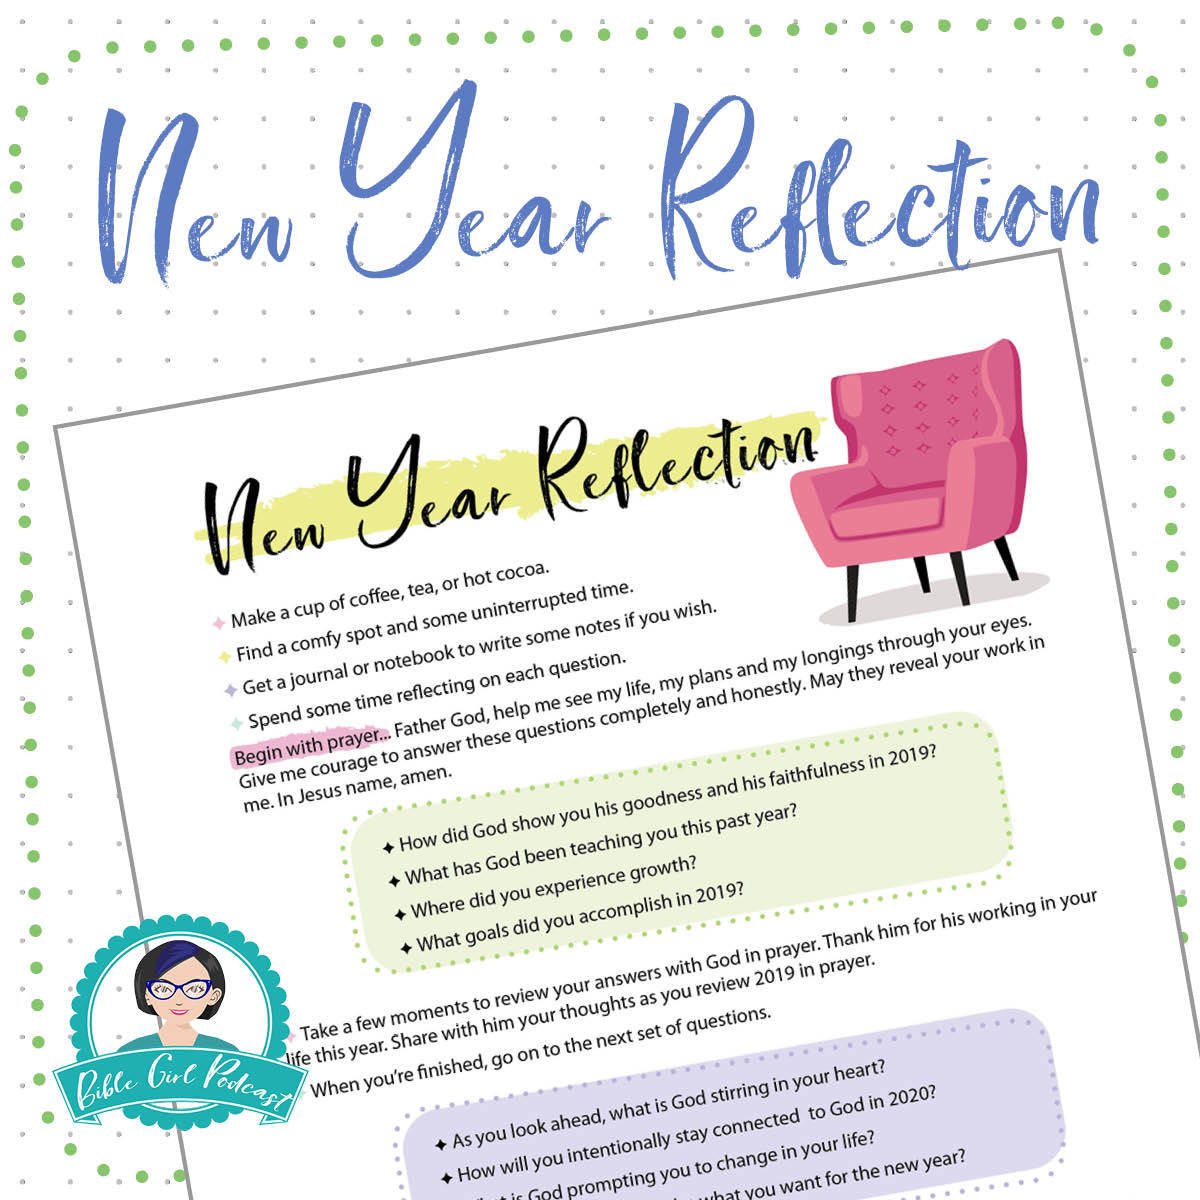 New Year's Reflection